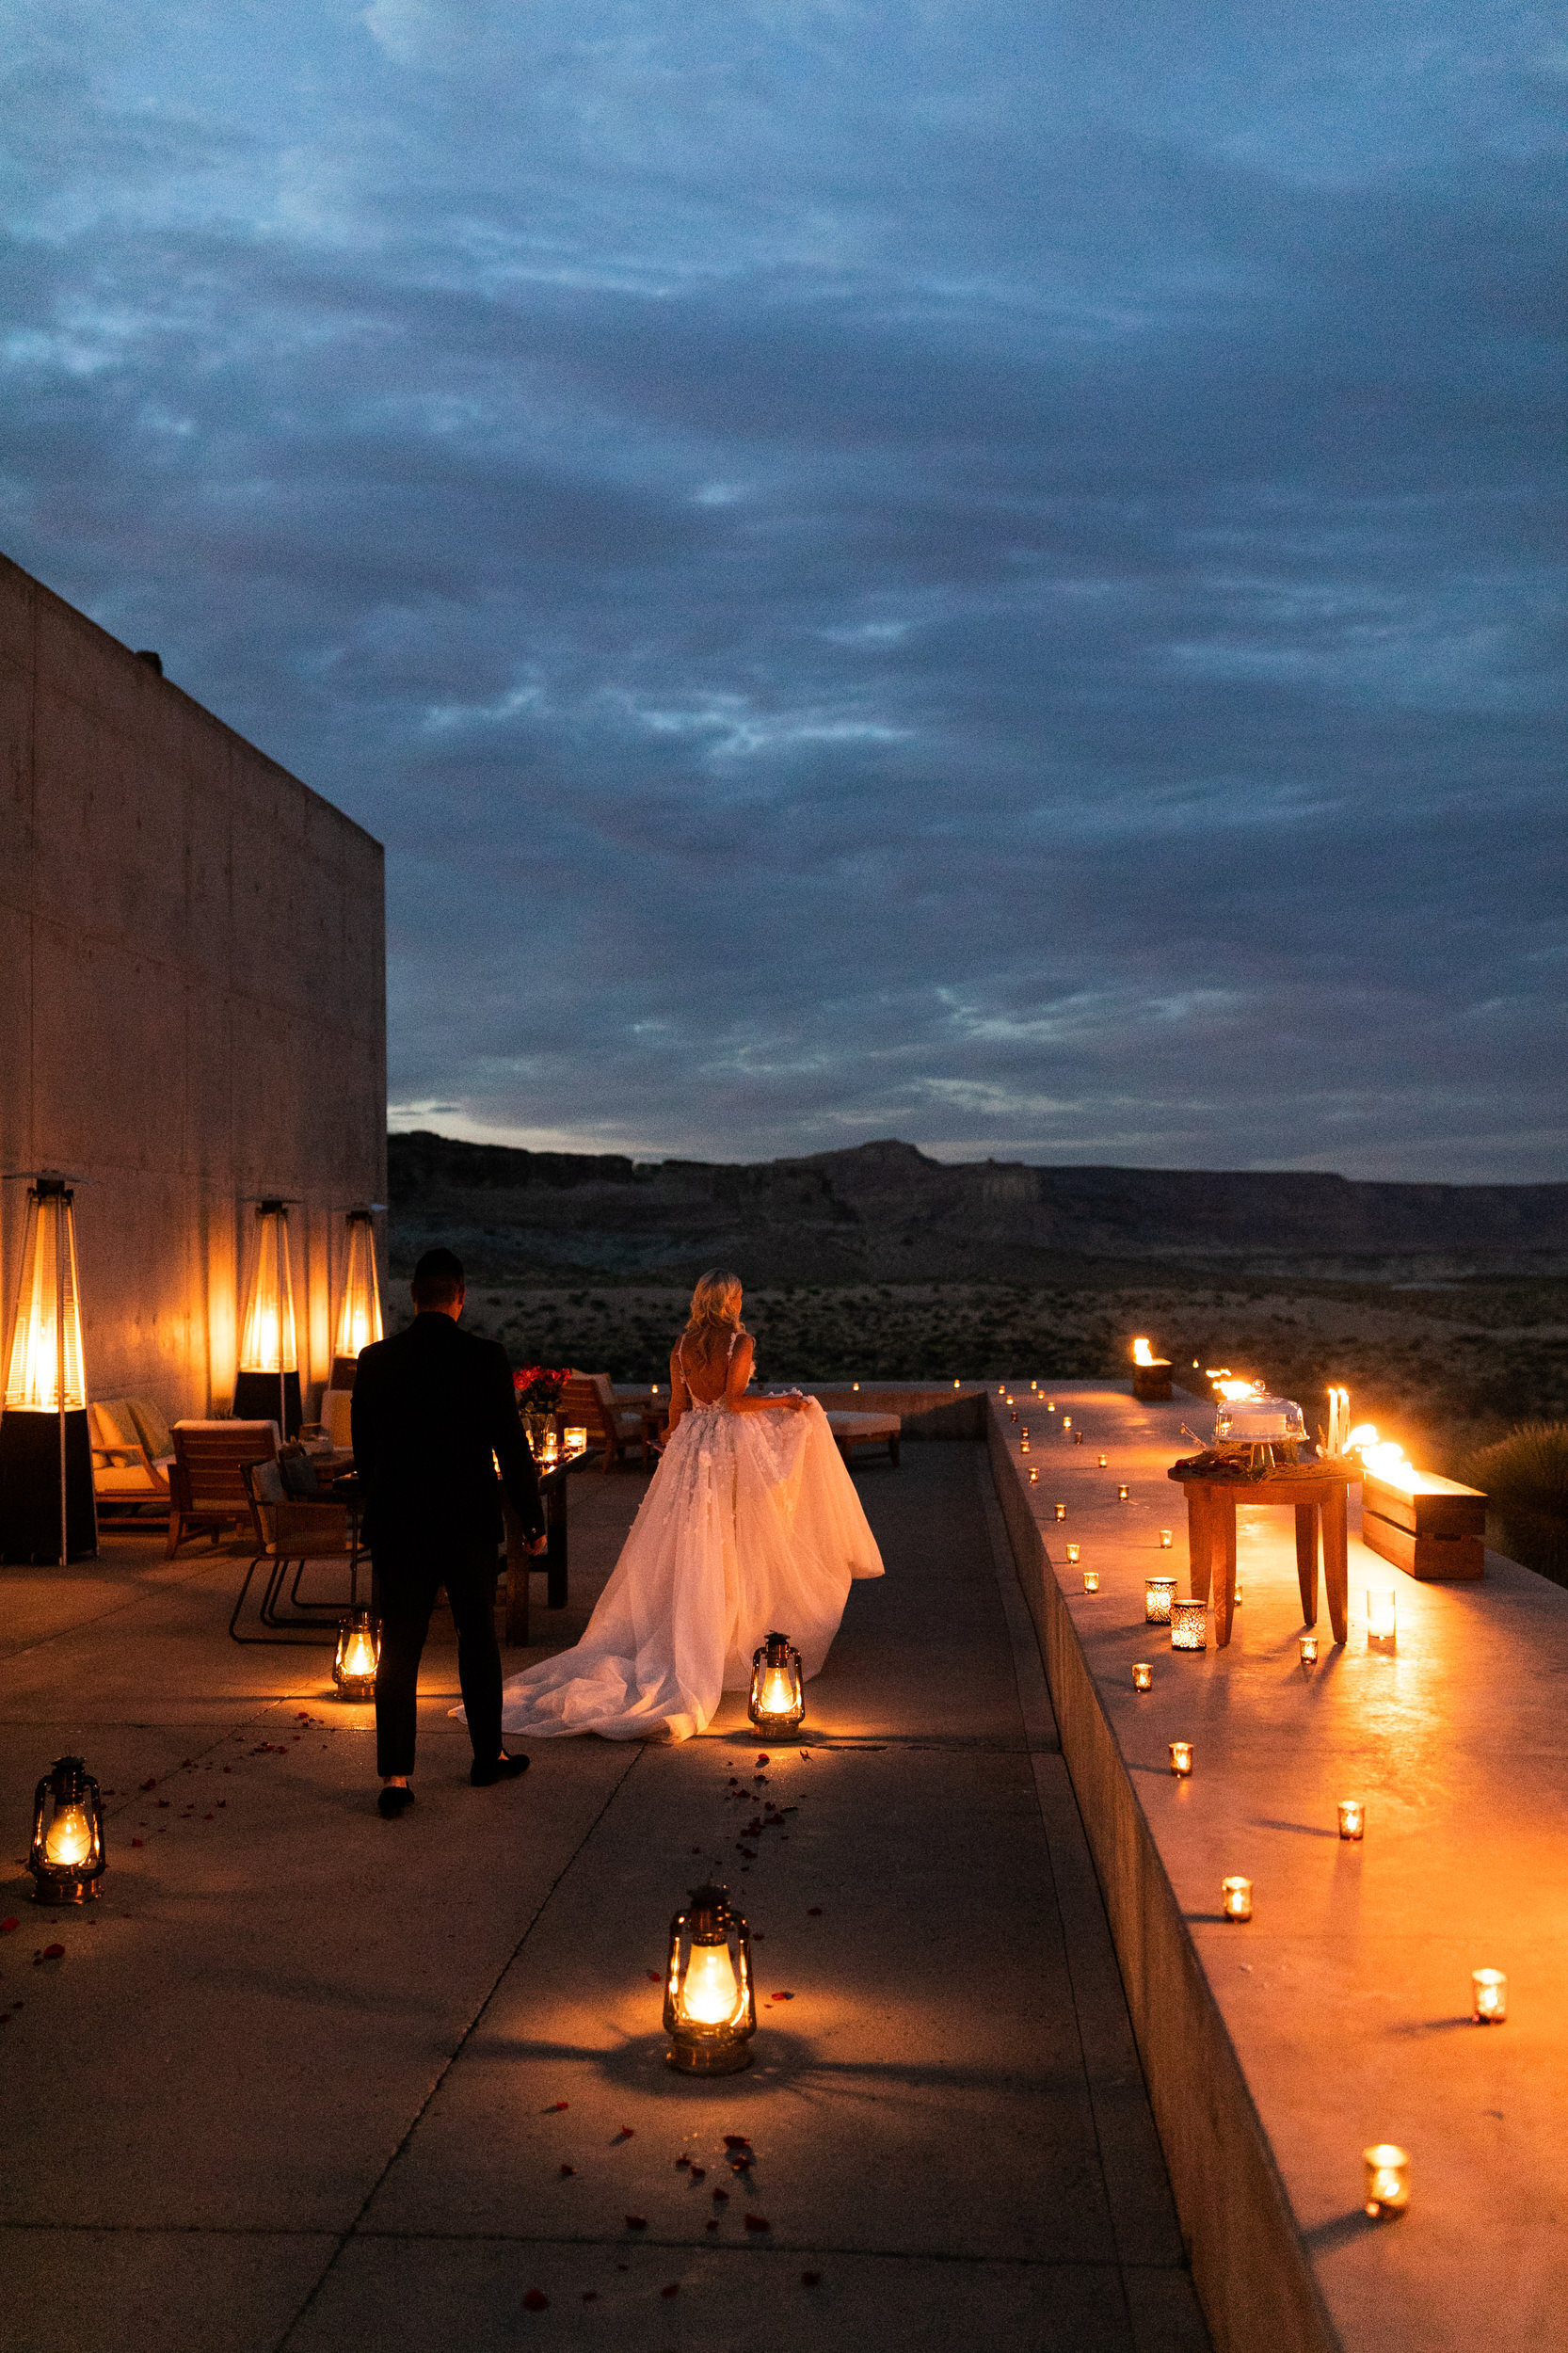 Romantic Dinner at Amangiri | Best of 2020, Our Favorite Wedding Photos of the Year | The Hearnes Adventure Wedding Photography